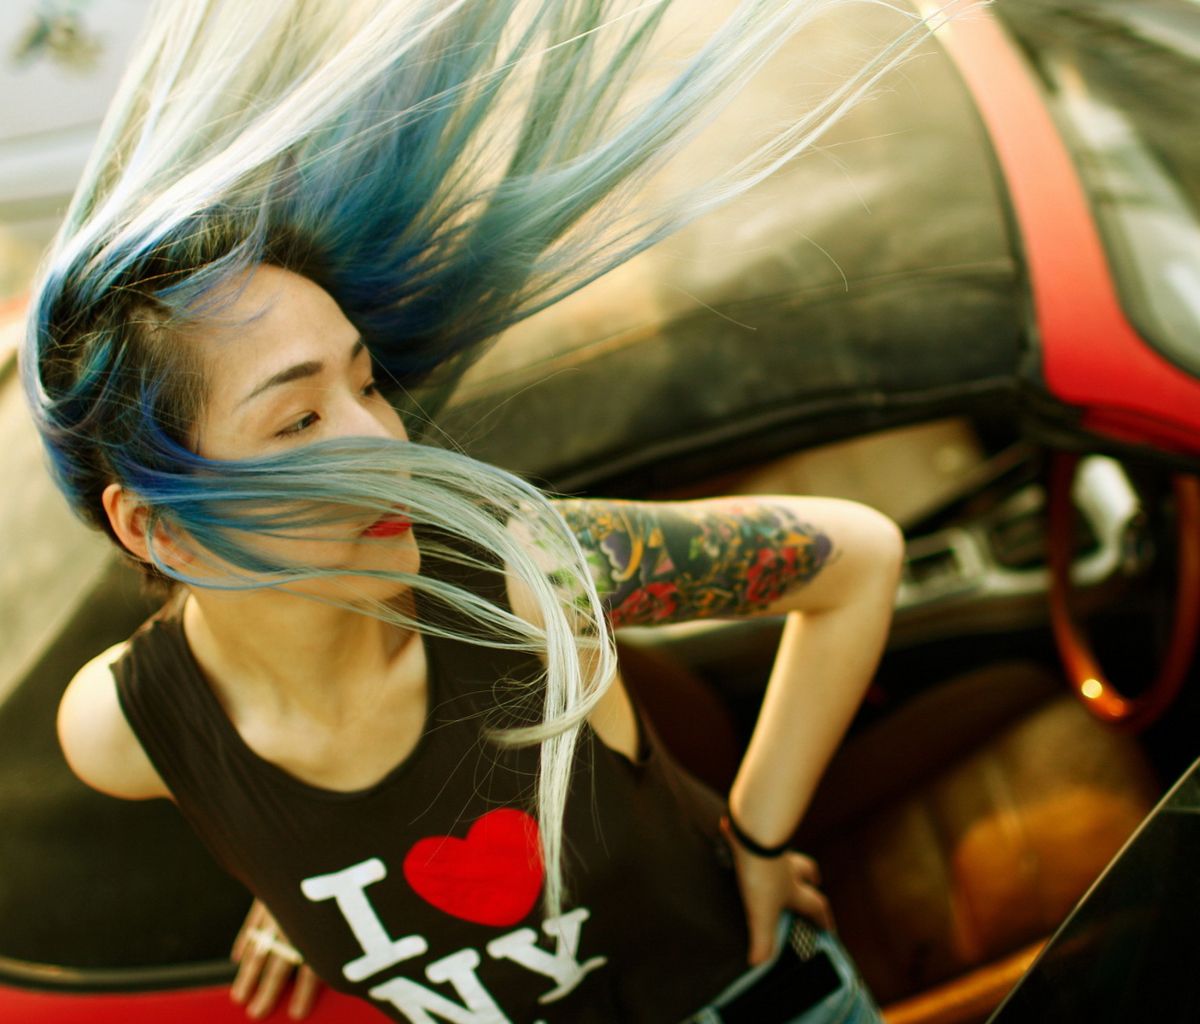 Das Cool Asian Girl With Blue Hair & I Love NY T-shirt Wallpaper 1200x1024